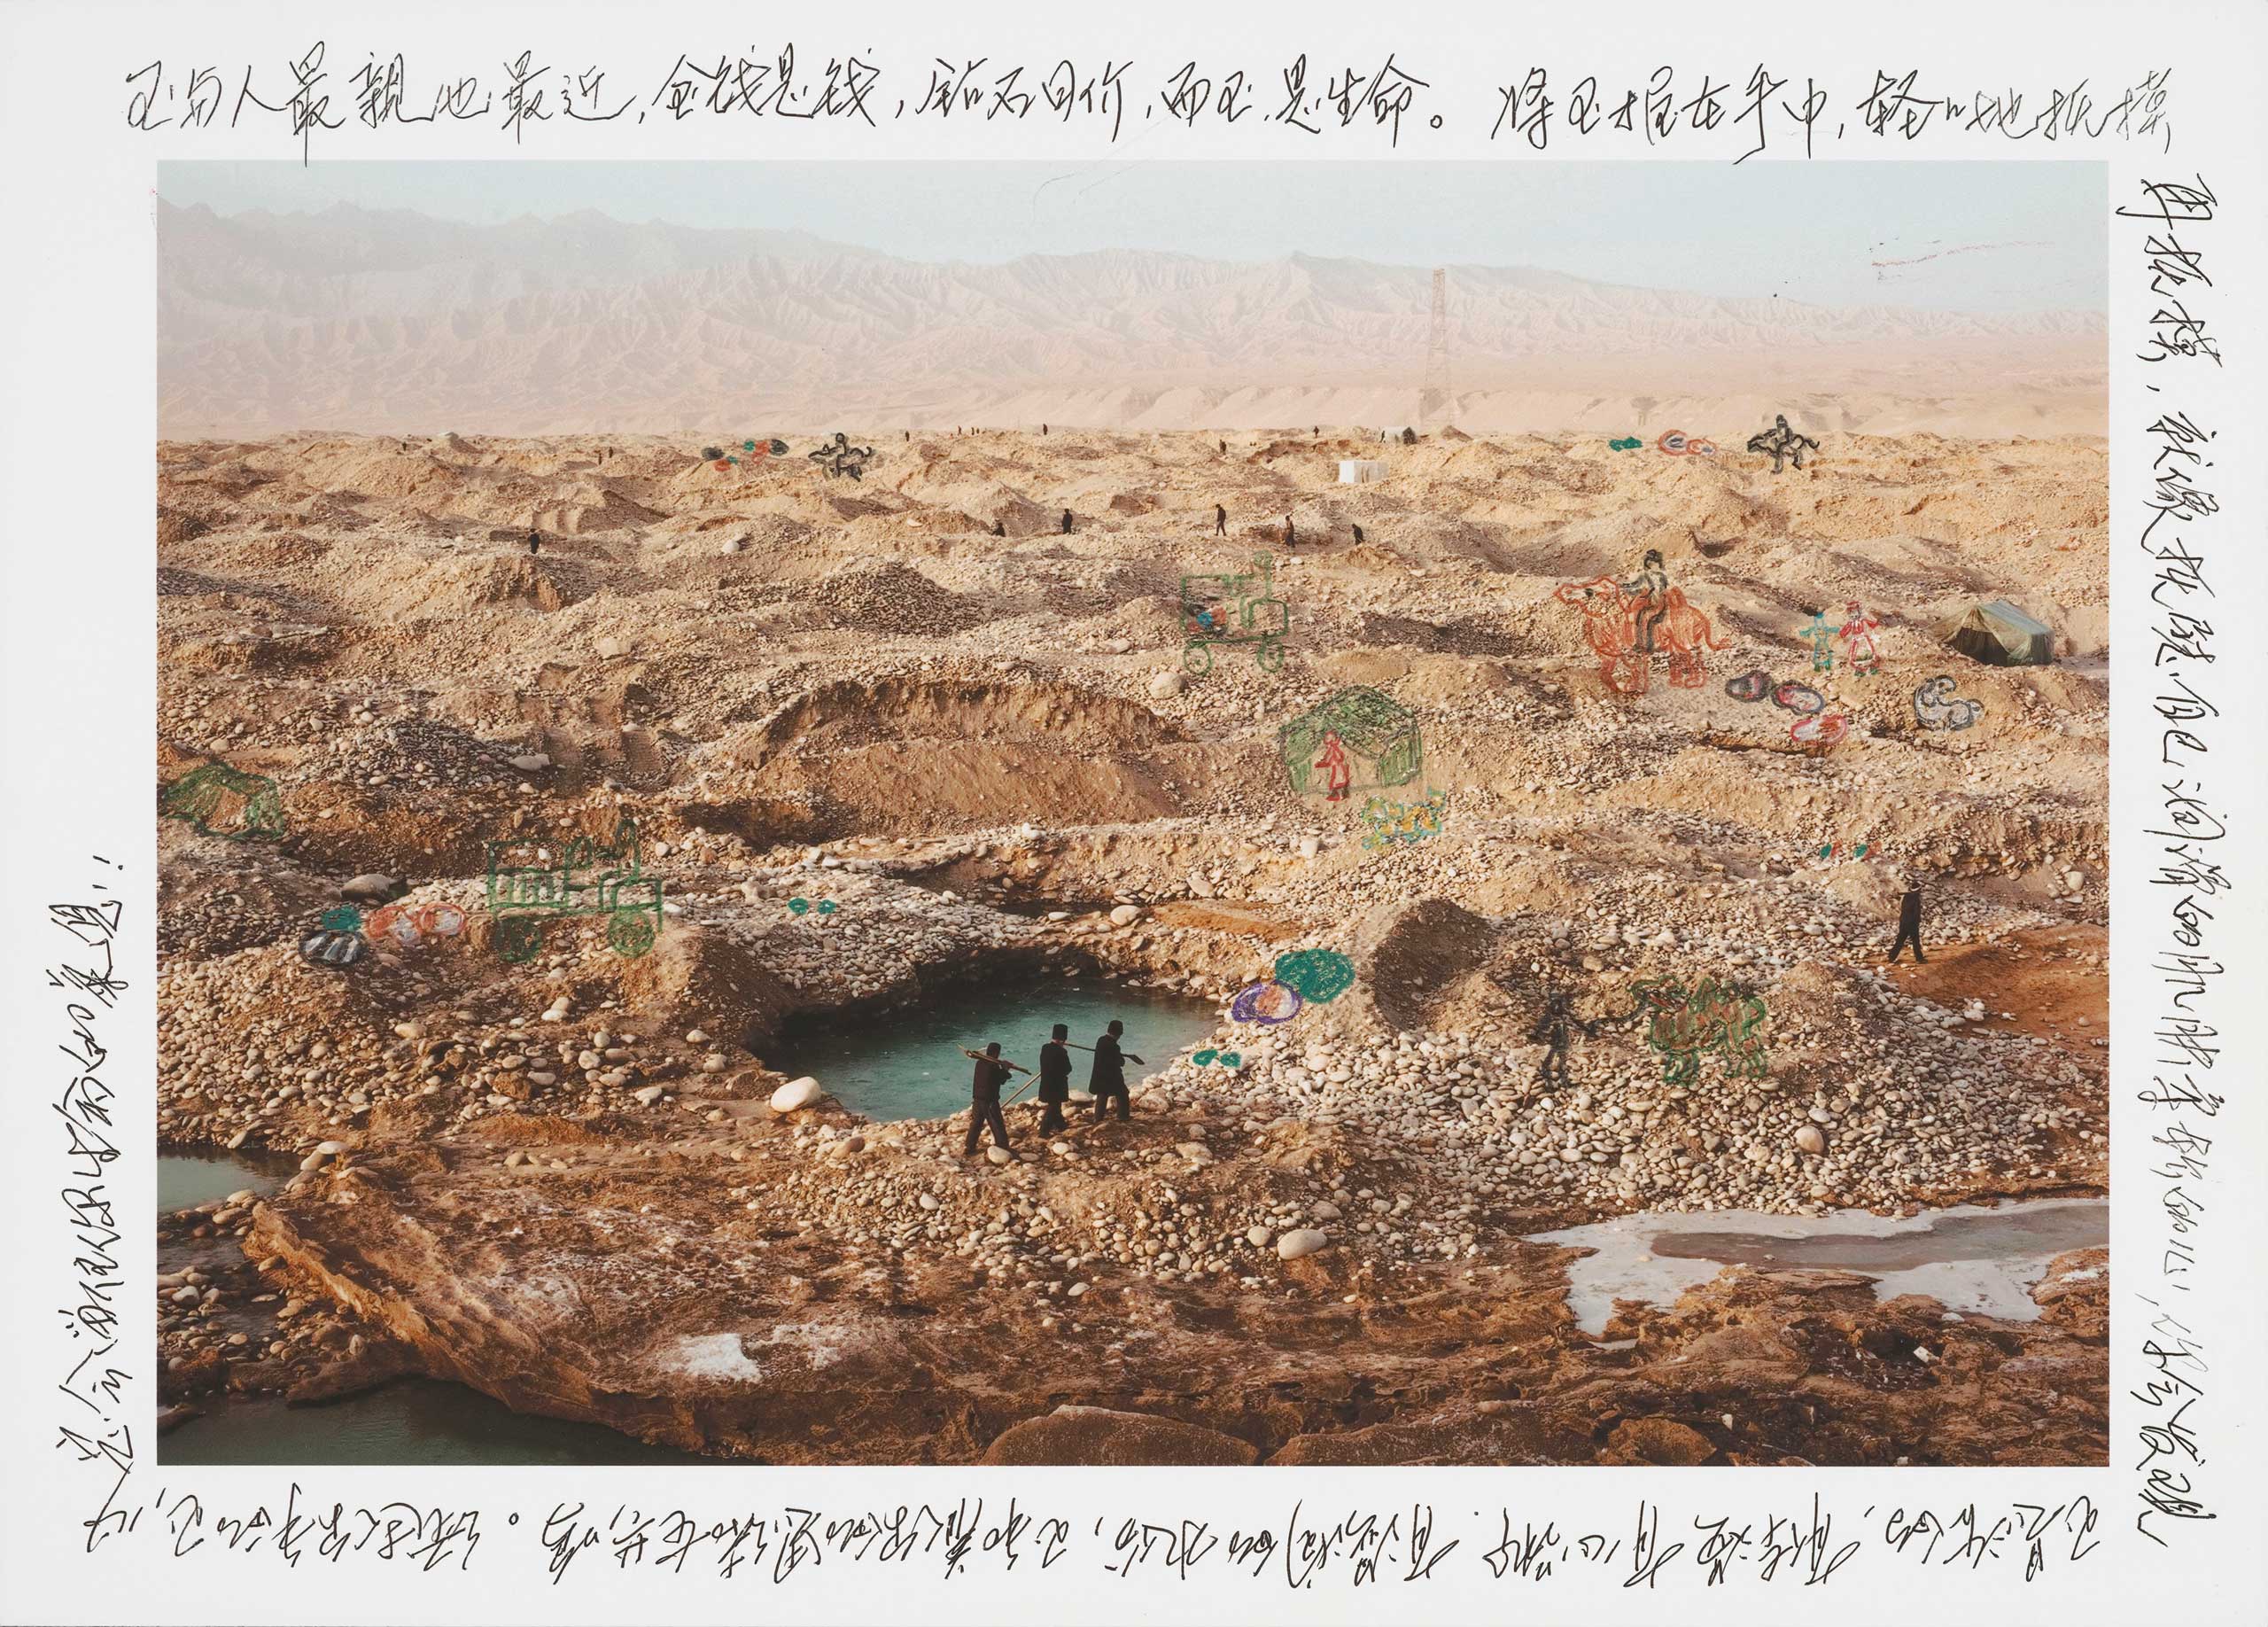 White Jade River. 2013. A message about the soul of jade written by a Chinese jade carver. White Jade River, Hotan, Xinjiang Uyghur Autonomous Region, China.